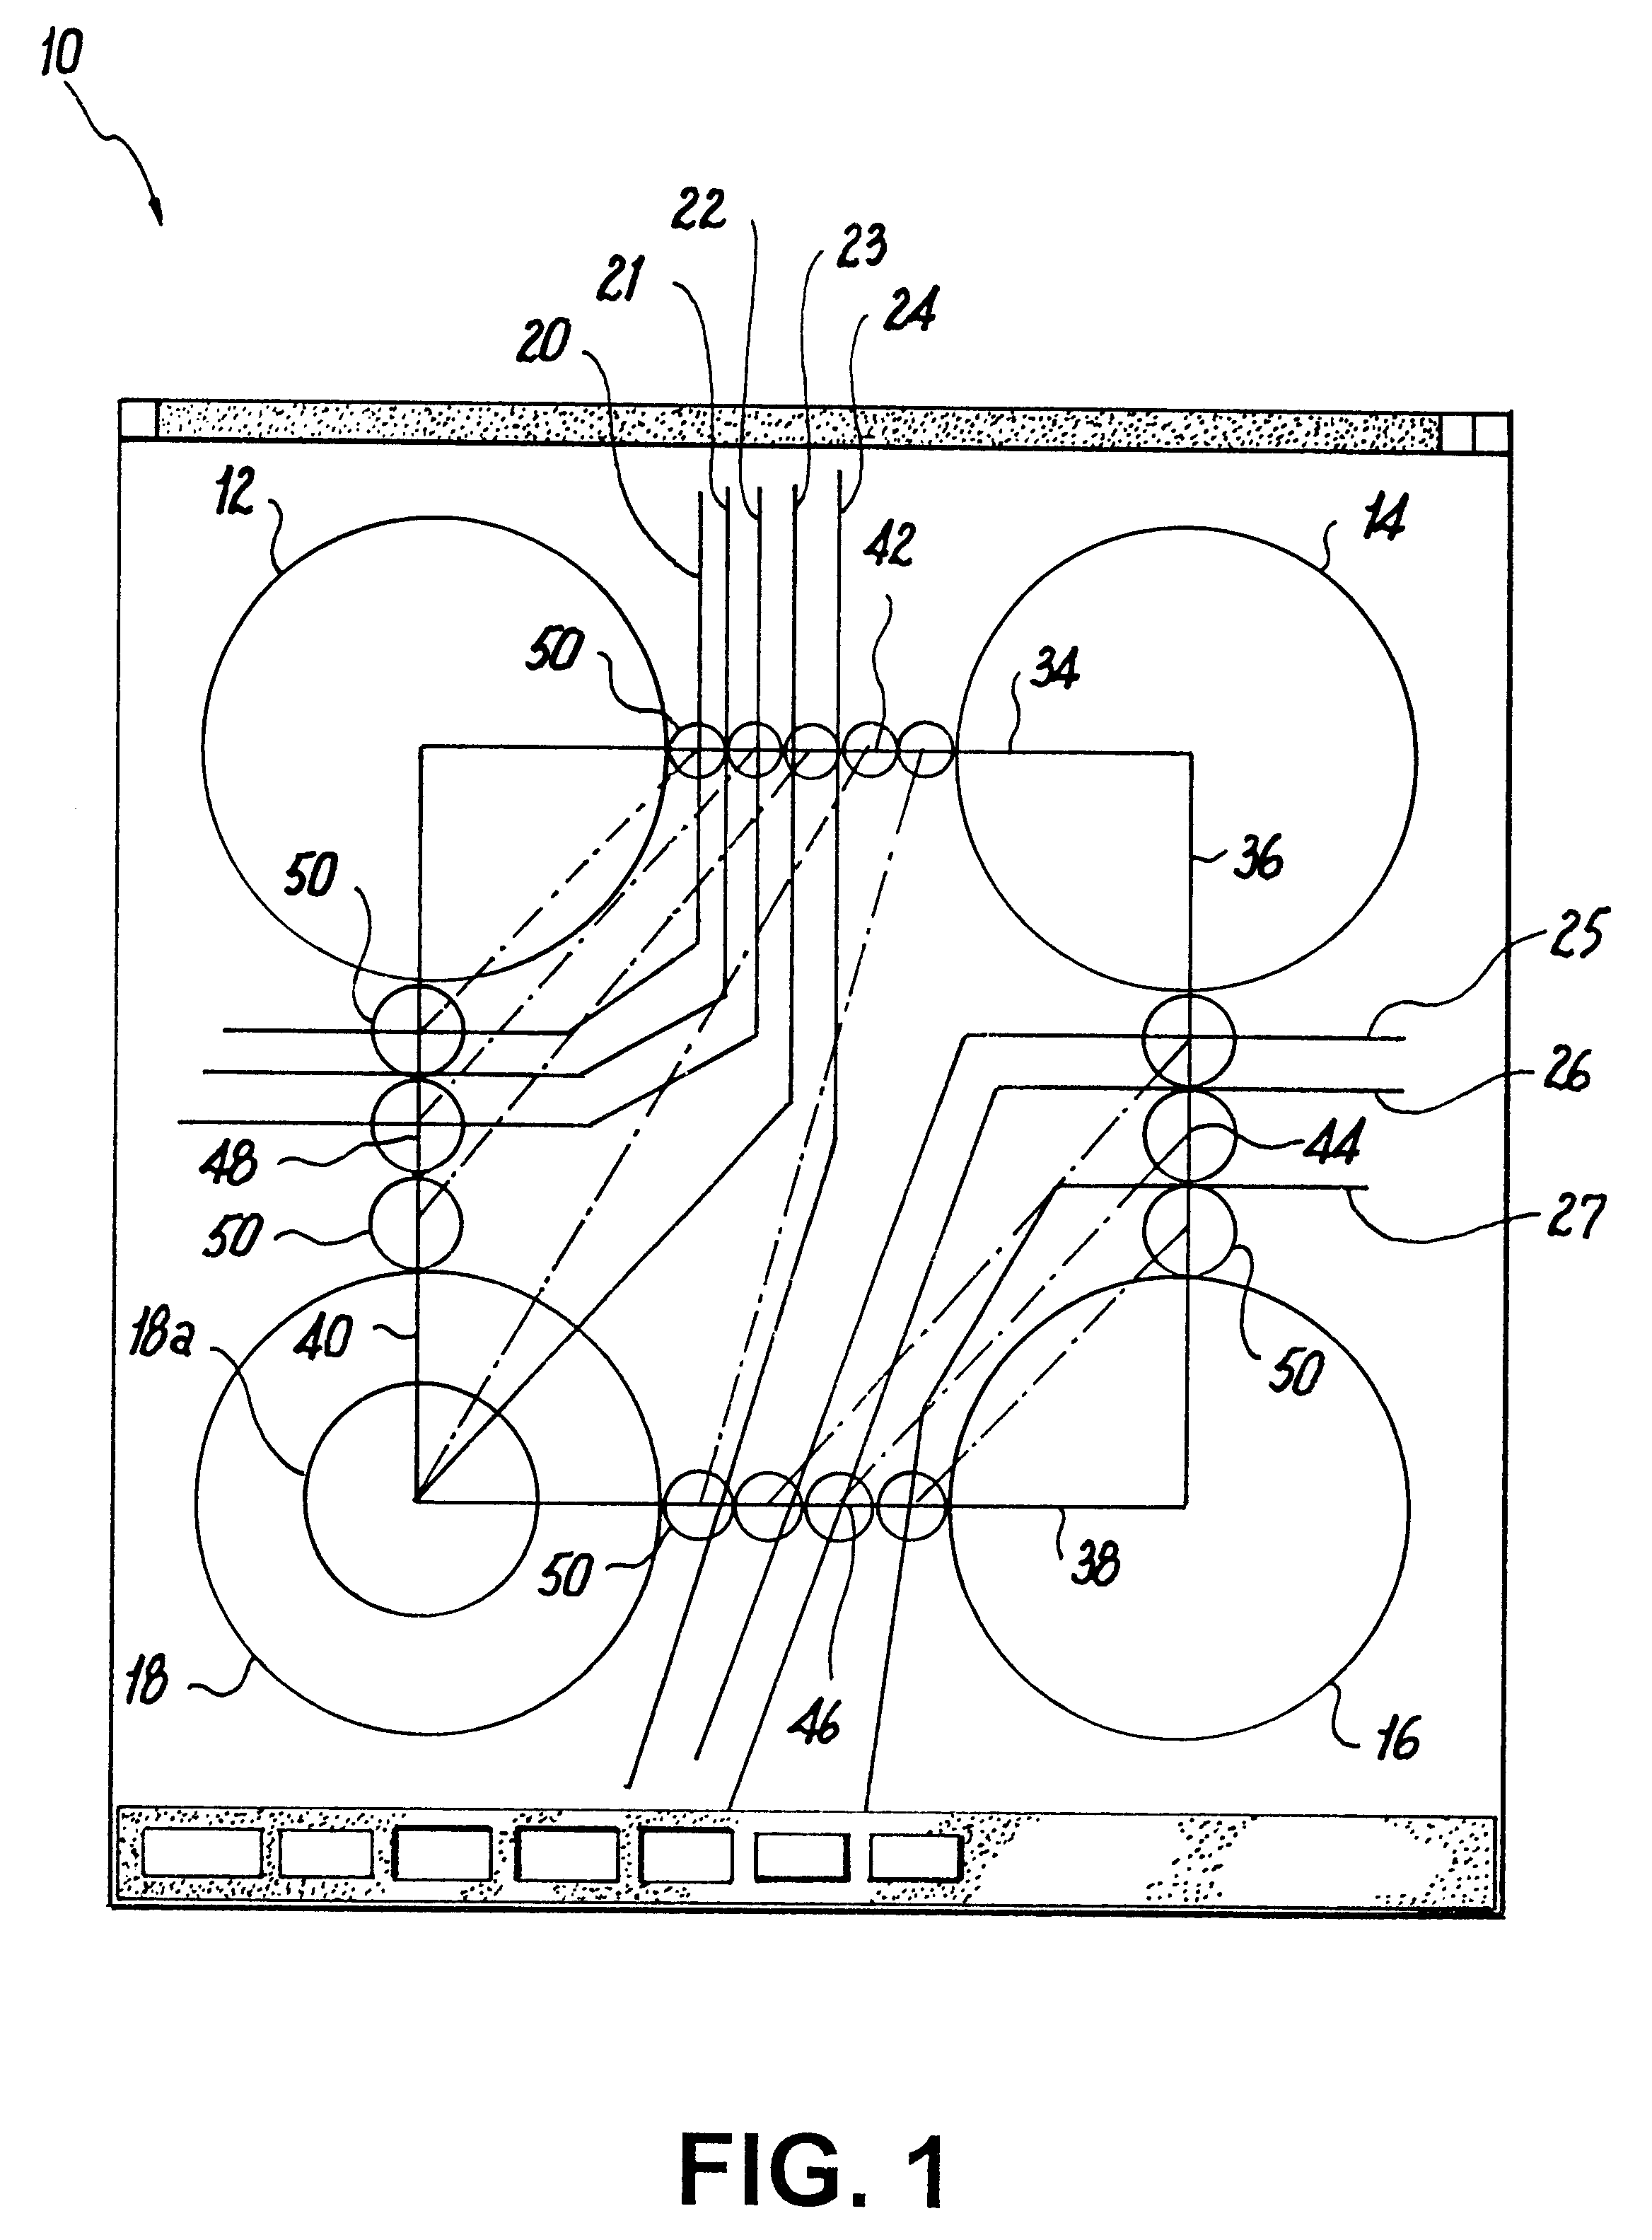 Optimization of printed wire circuitry on a single surface using a circle diameter